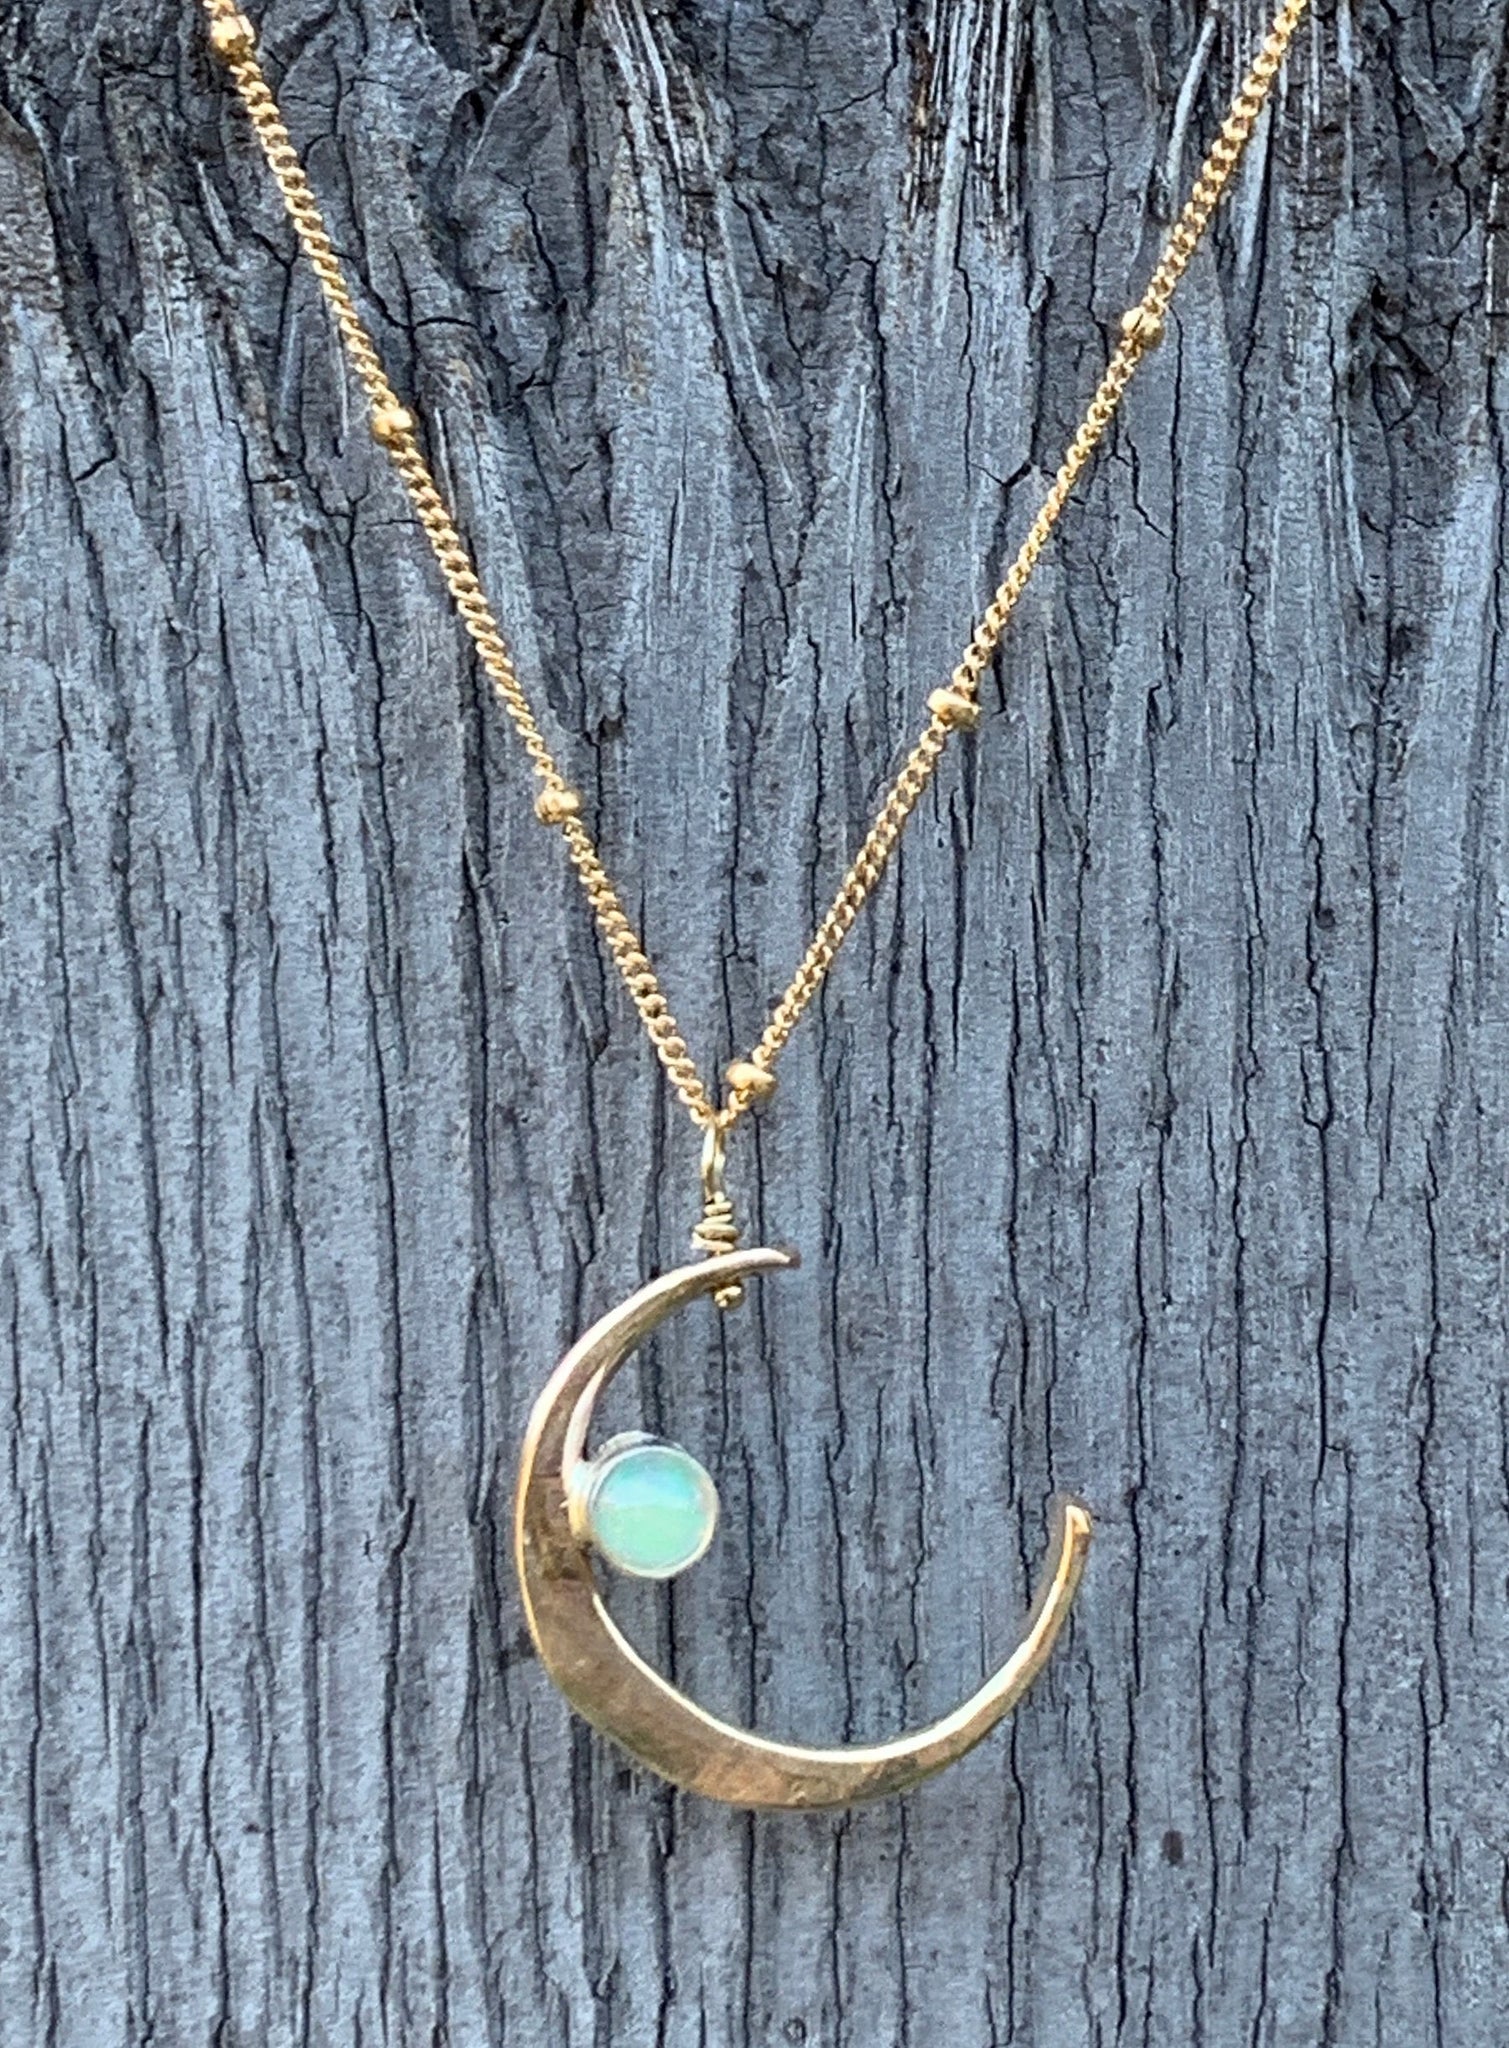 Handmade 14K Gold Fill Crescent Moon Necklace with Tube Set Opal